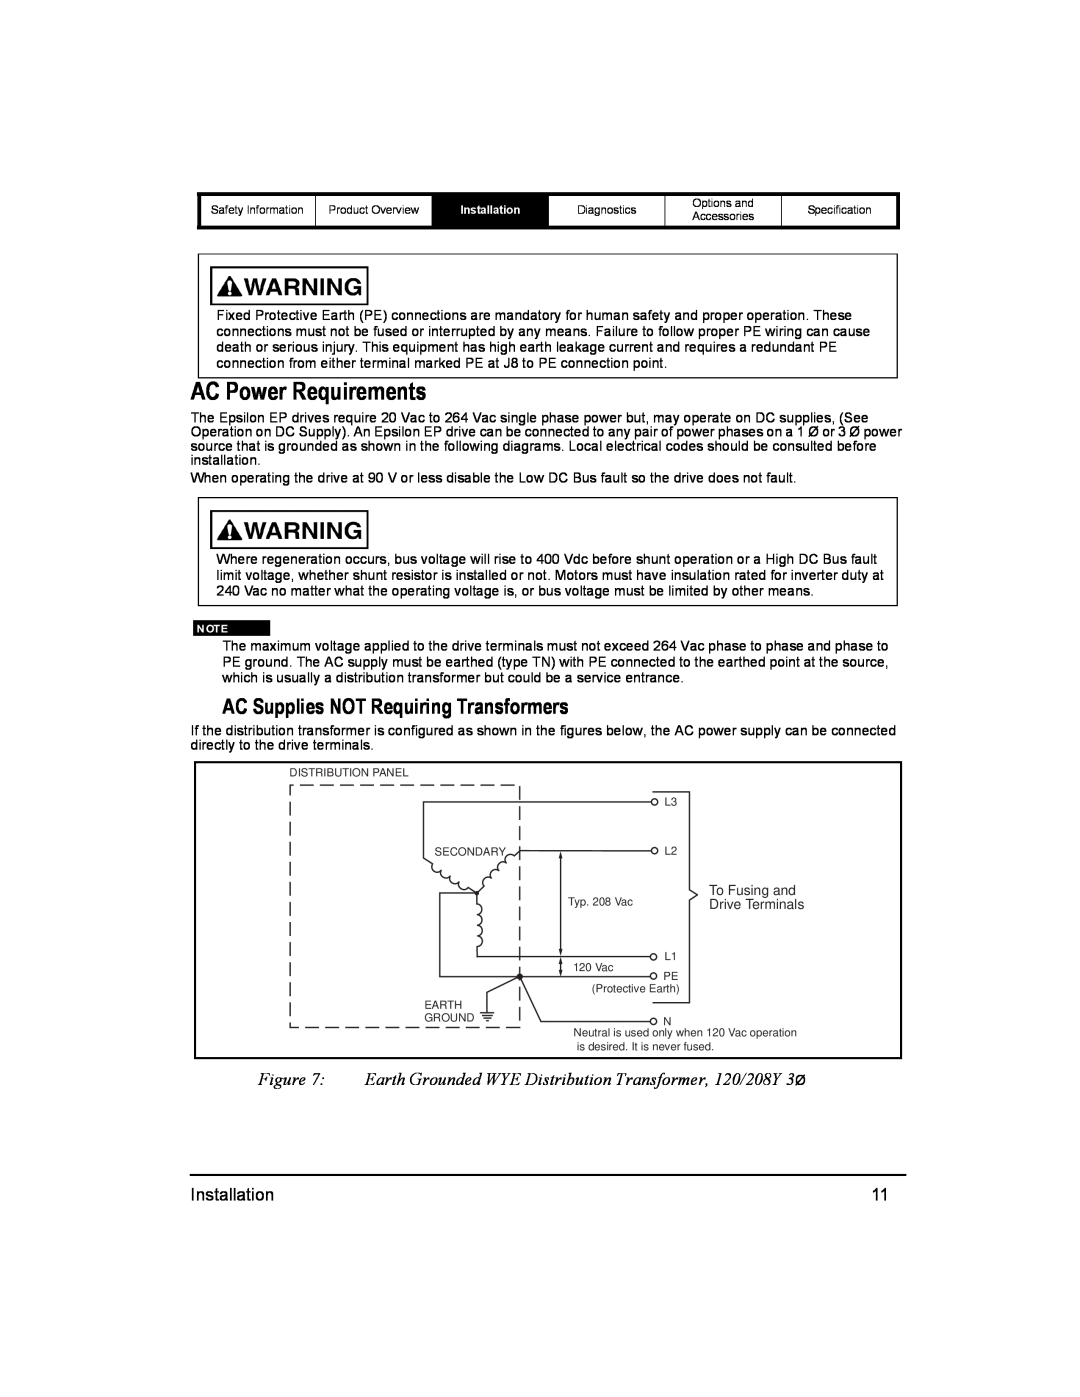 Emerson 400518-01 installation manual AC Power Requirements, AC Supplies NOT Requiring Transformers 